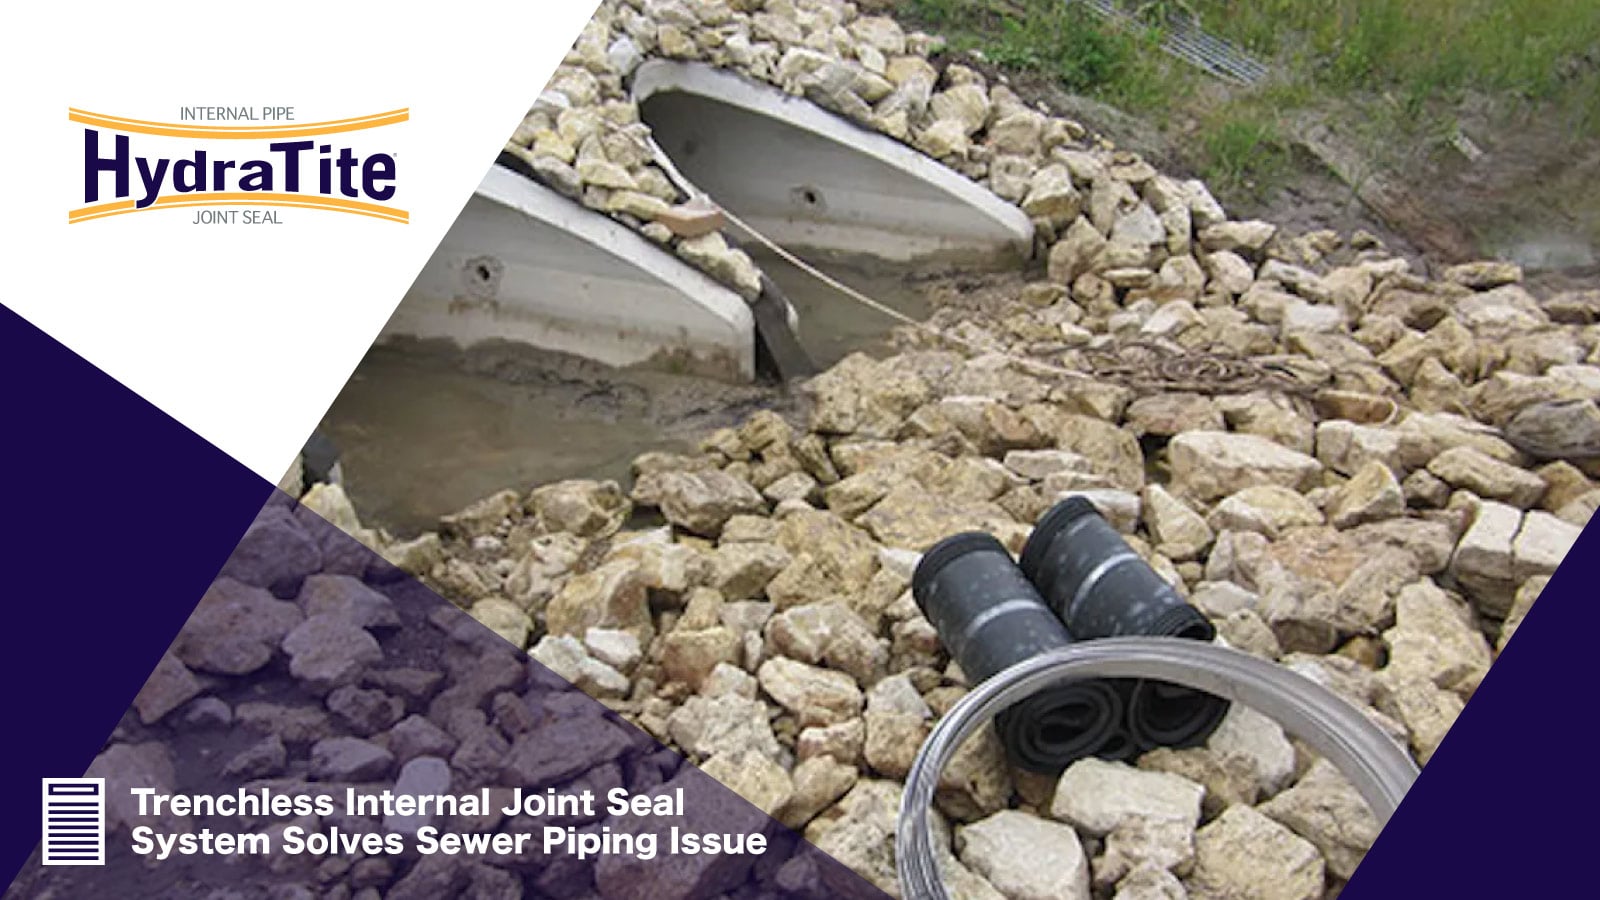 The opening of a twin culvert with the parts of a HydraTite Seal laying near by, 'Trenchless Internal Joint Seal System Solves Sewer Piping Issue'